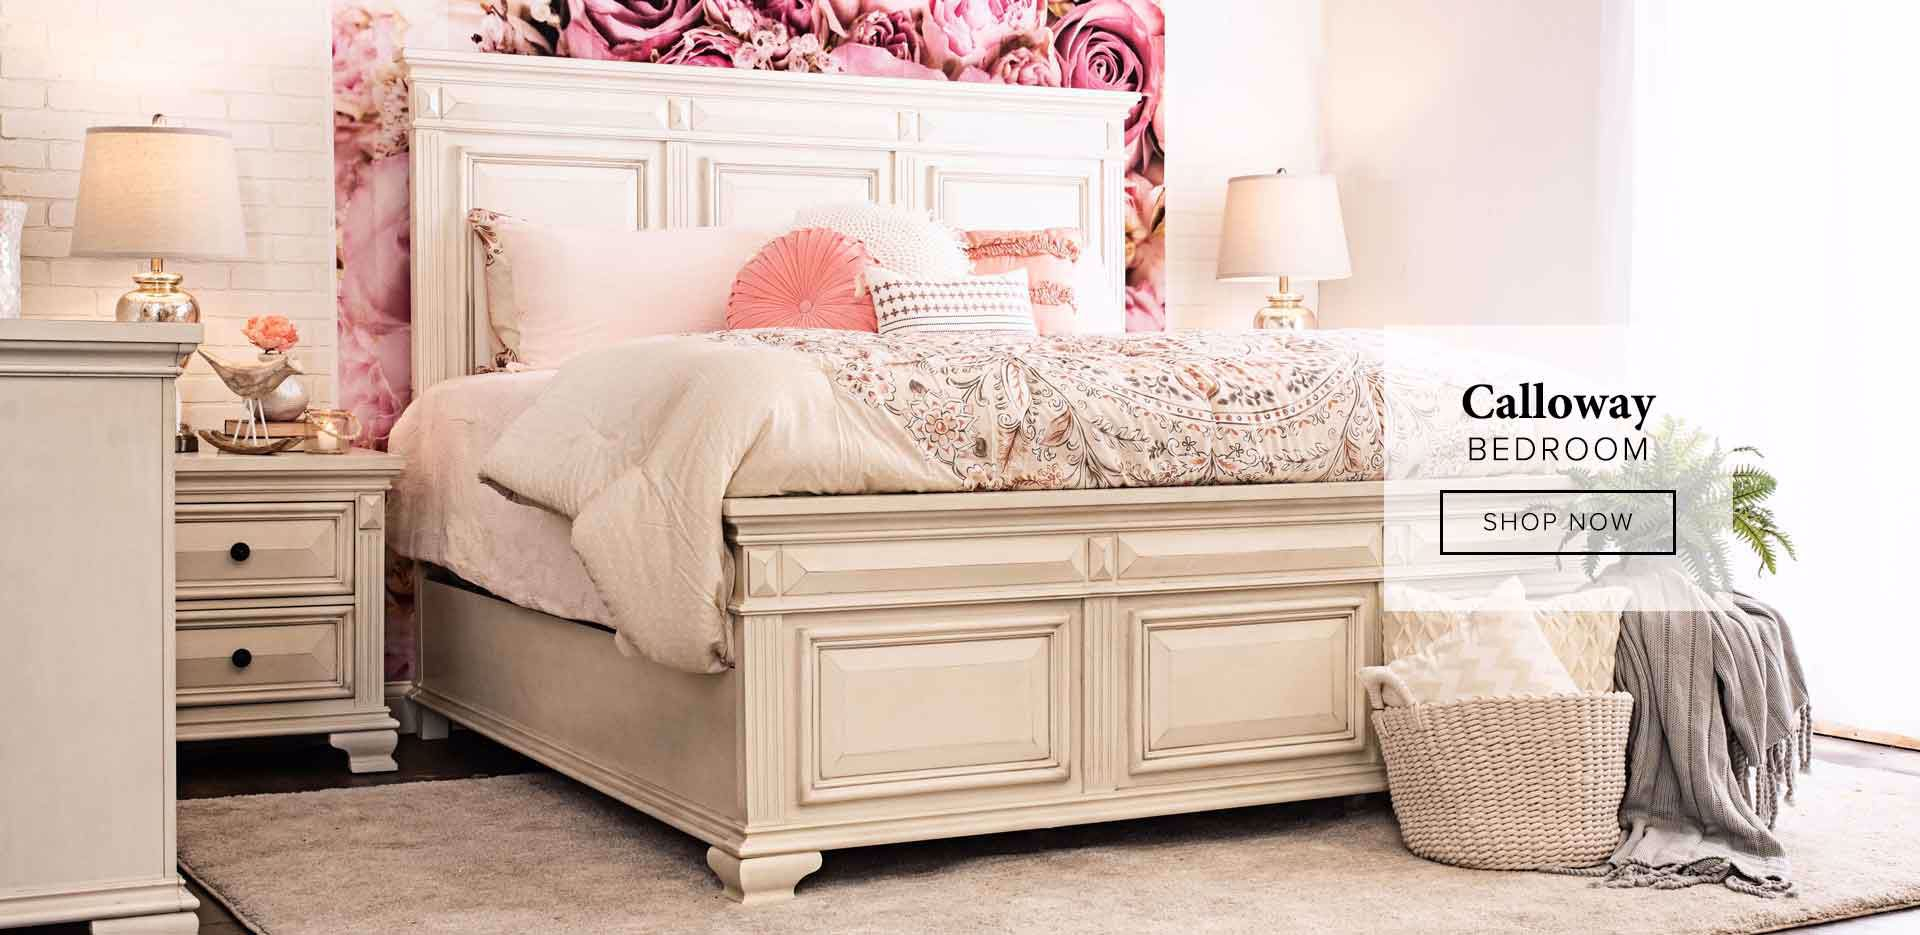 best place to finance bedroom furniture